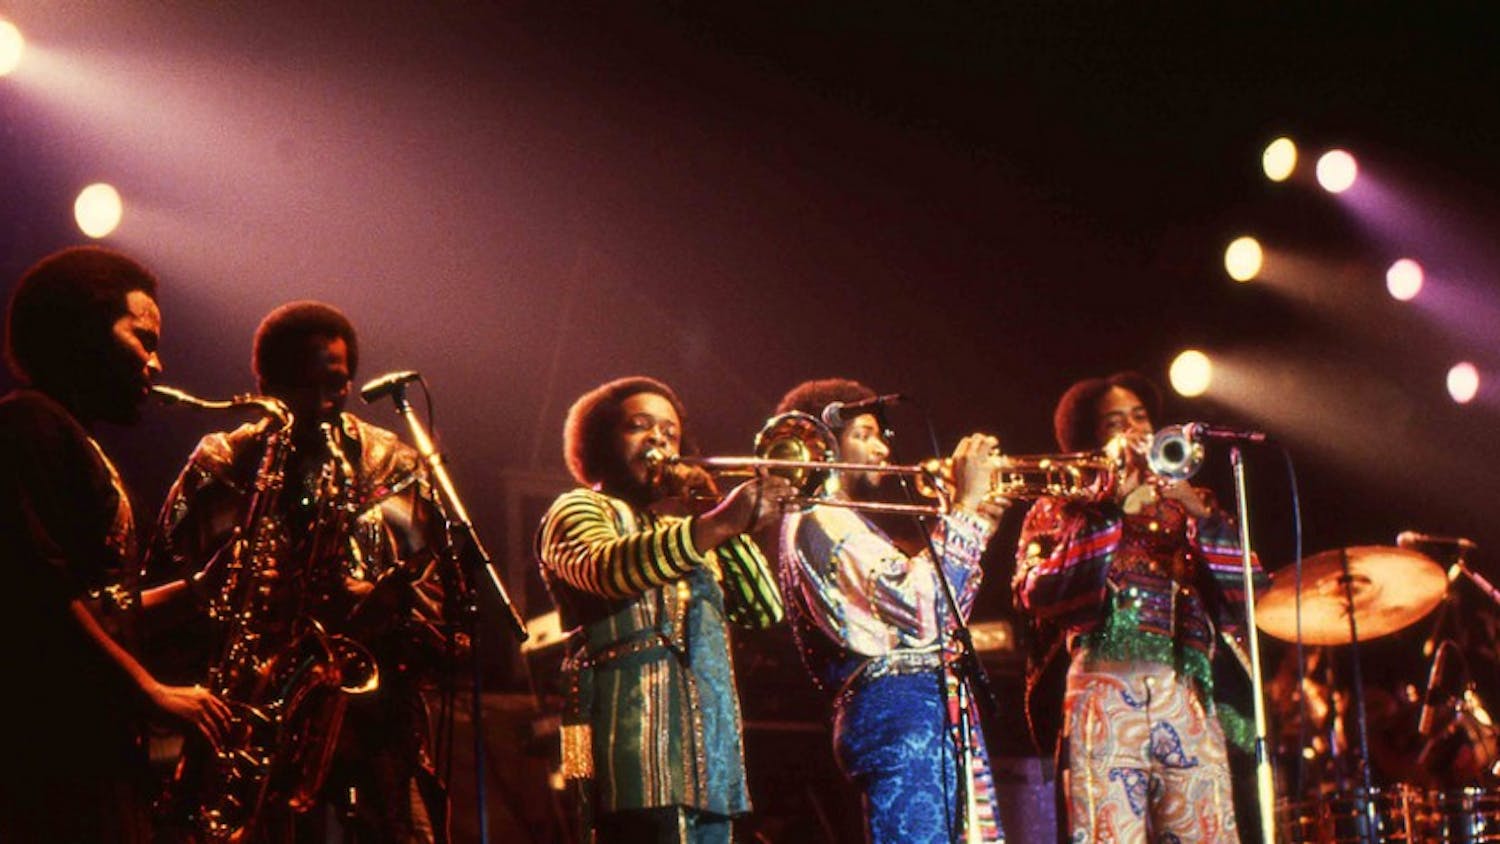 Earth, Wind & Fire's music has a timeless quality about it that can’t be measured &mdash; each song a message of love, understanding and ultimate grooviness.